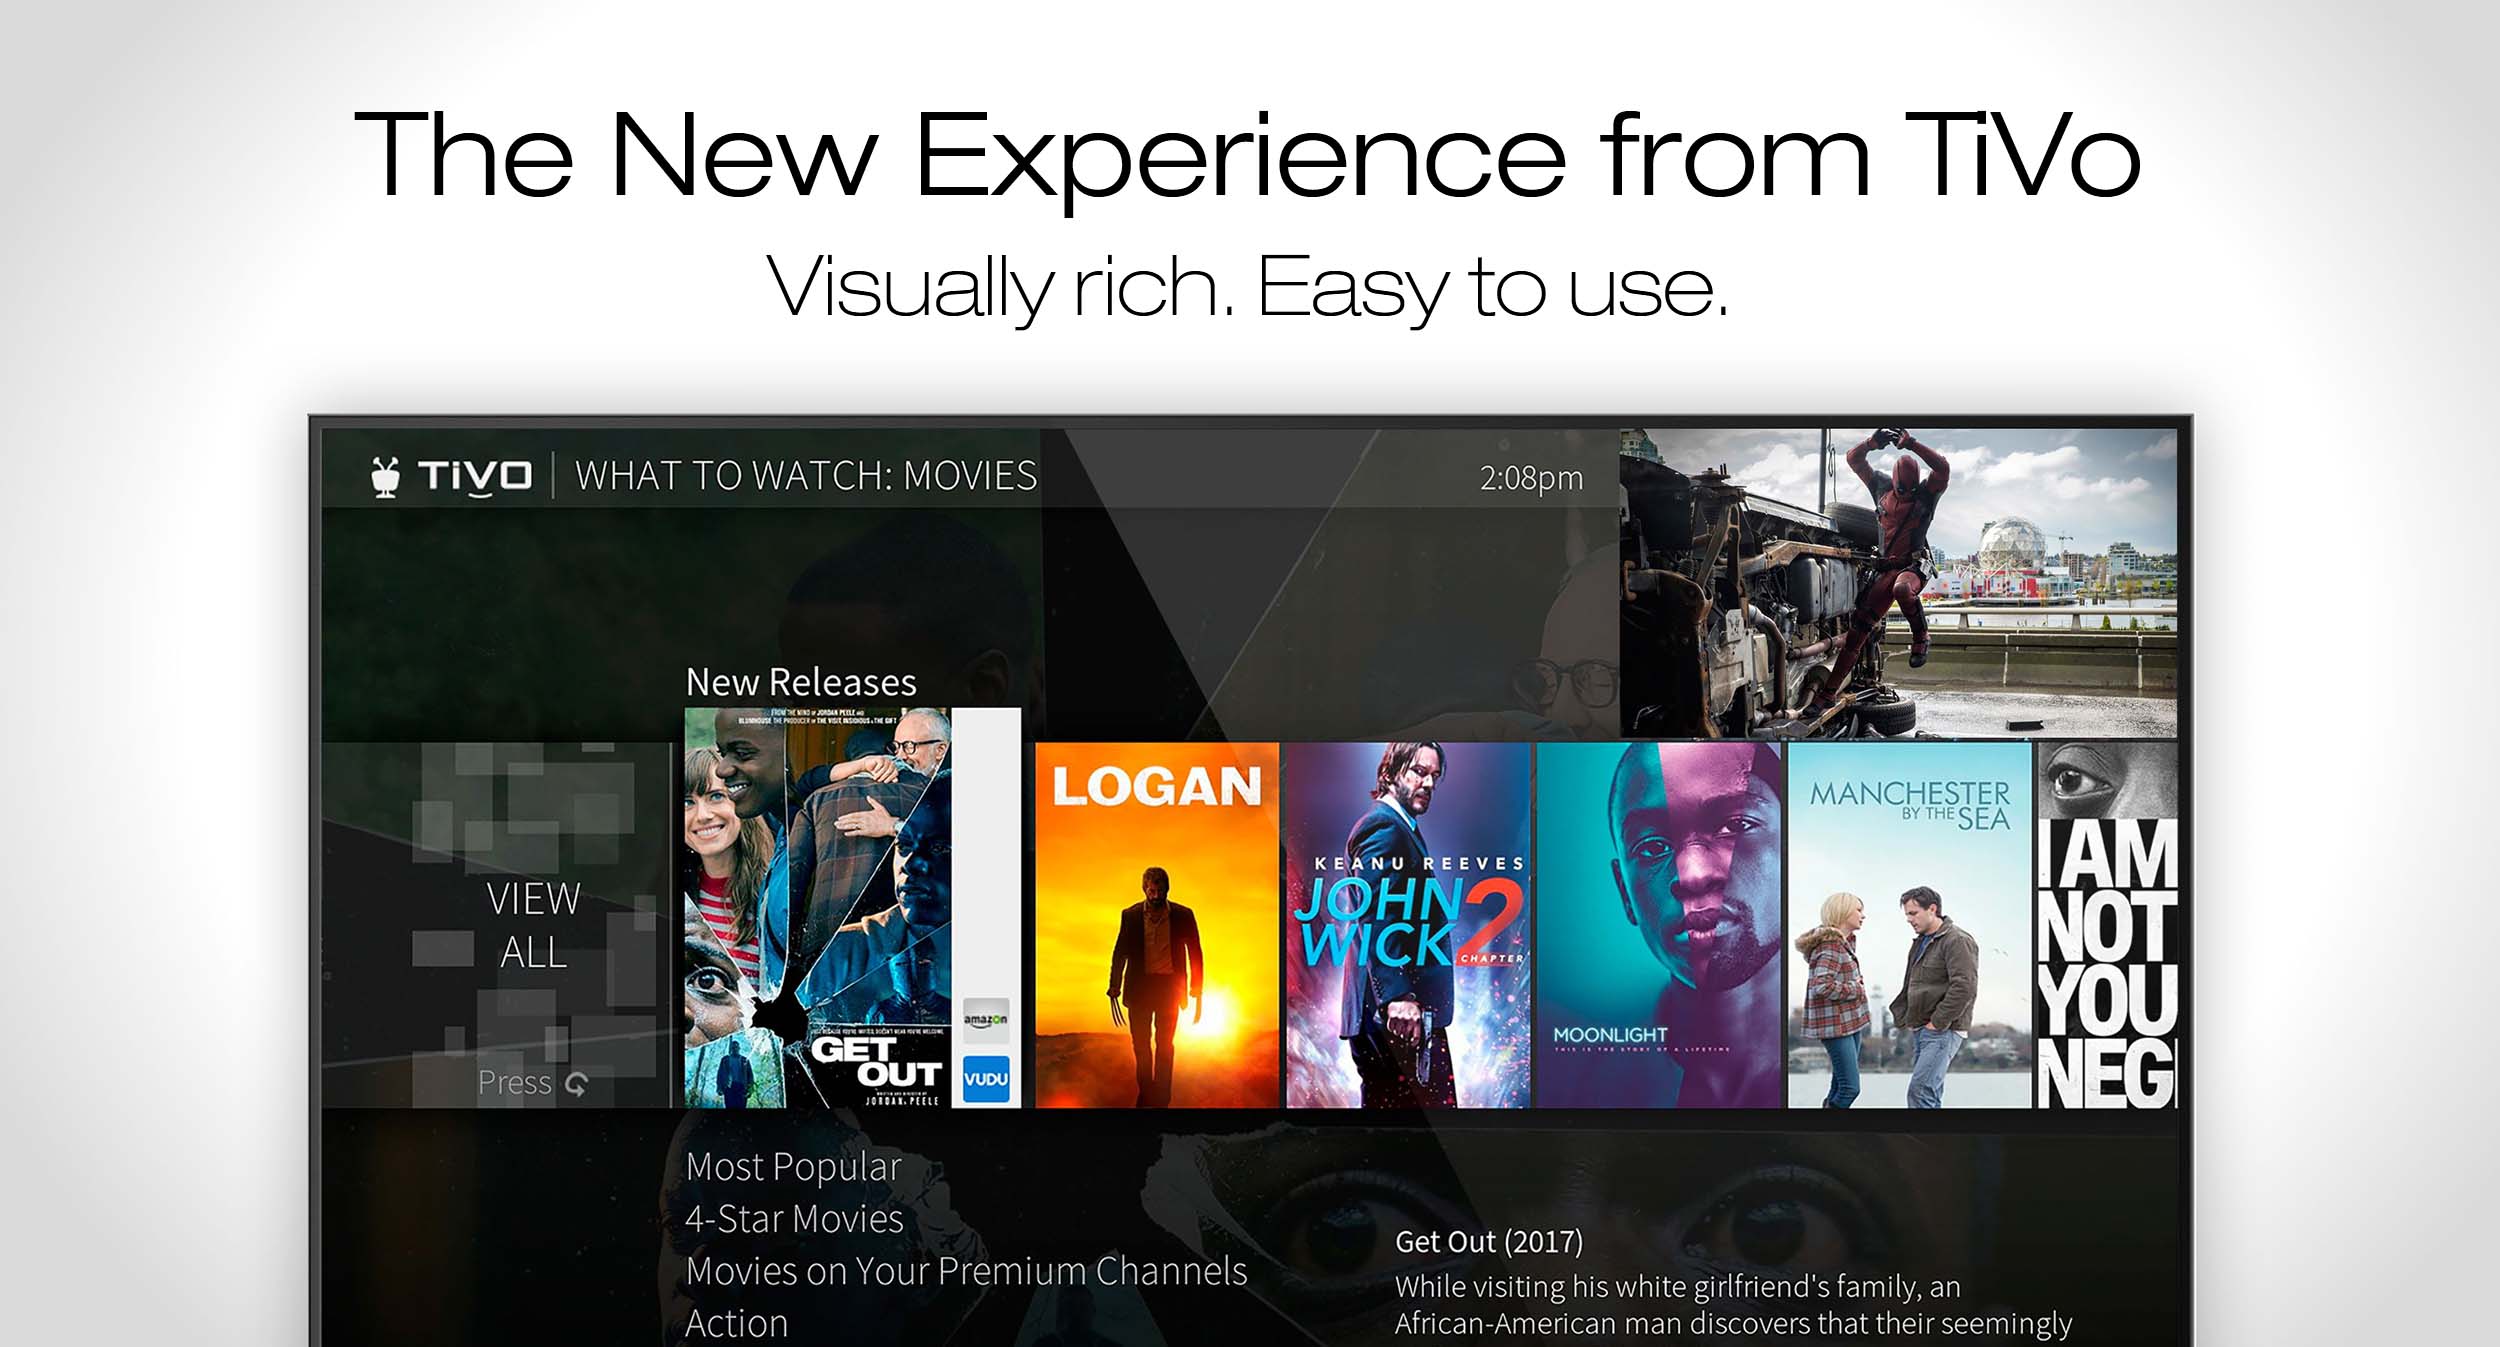 A graphic showcasing TiVo's New Experience user interface, with movies like Logan and John Wick 2 visible in a carousel